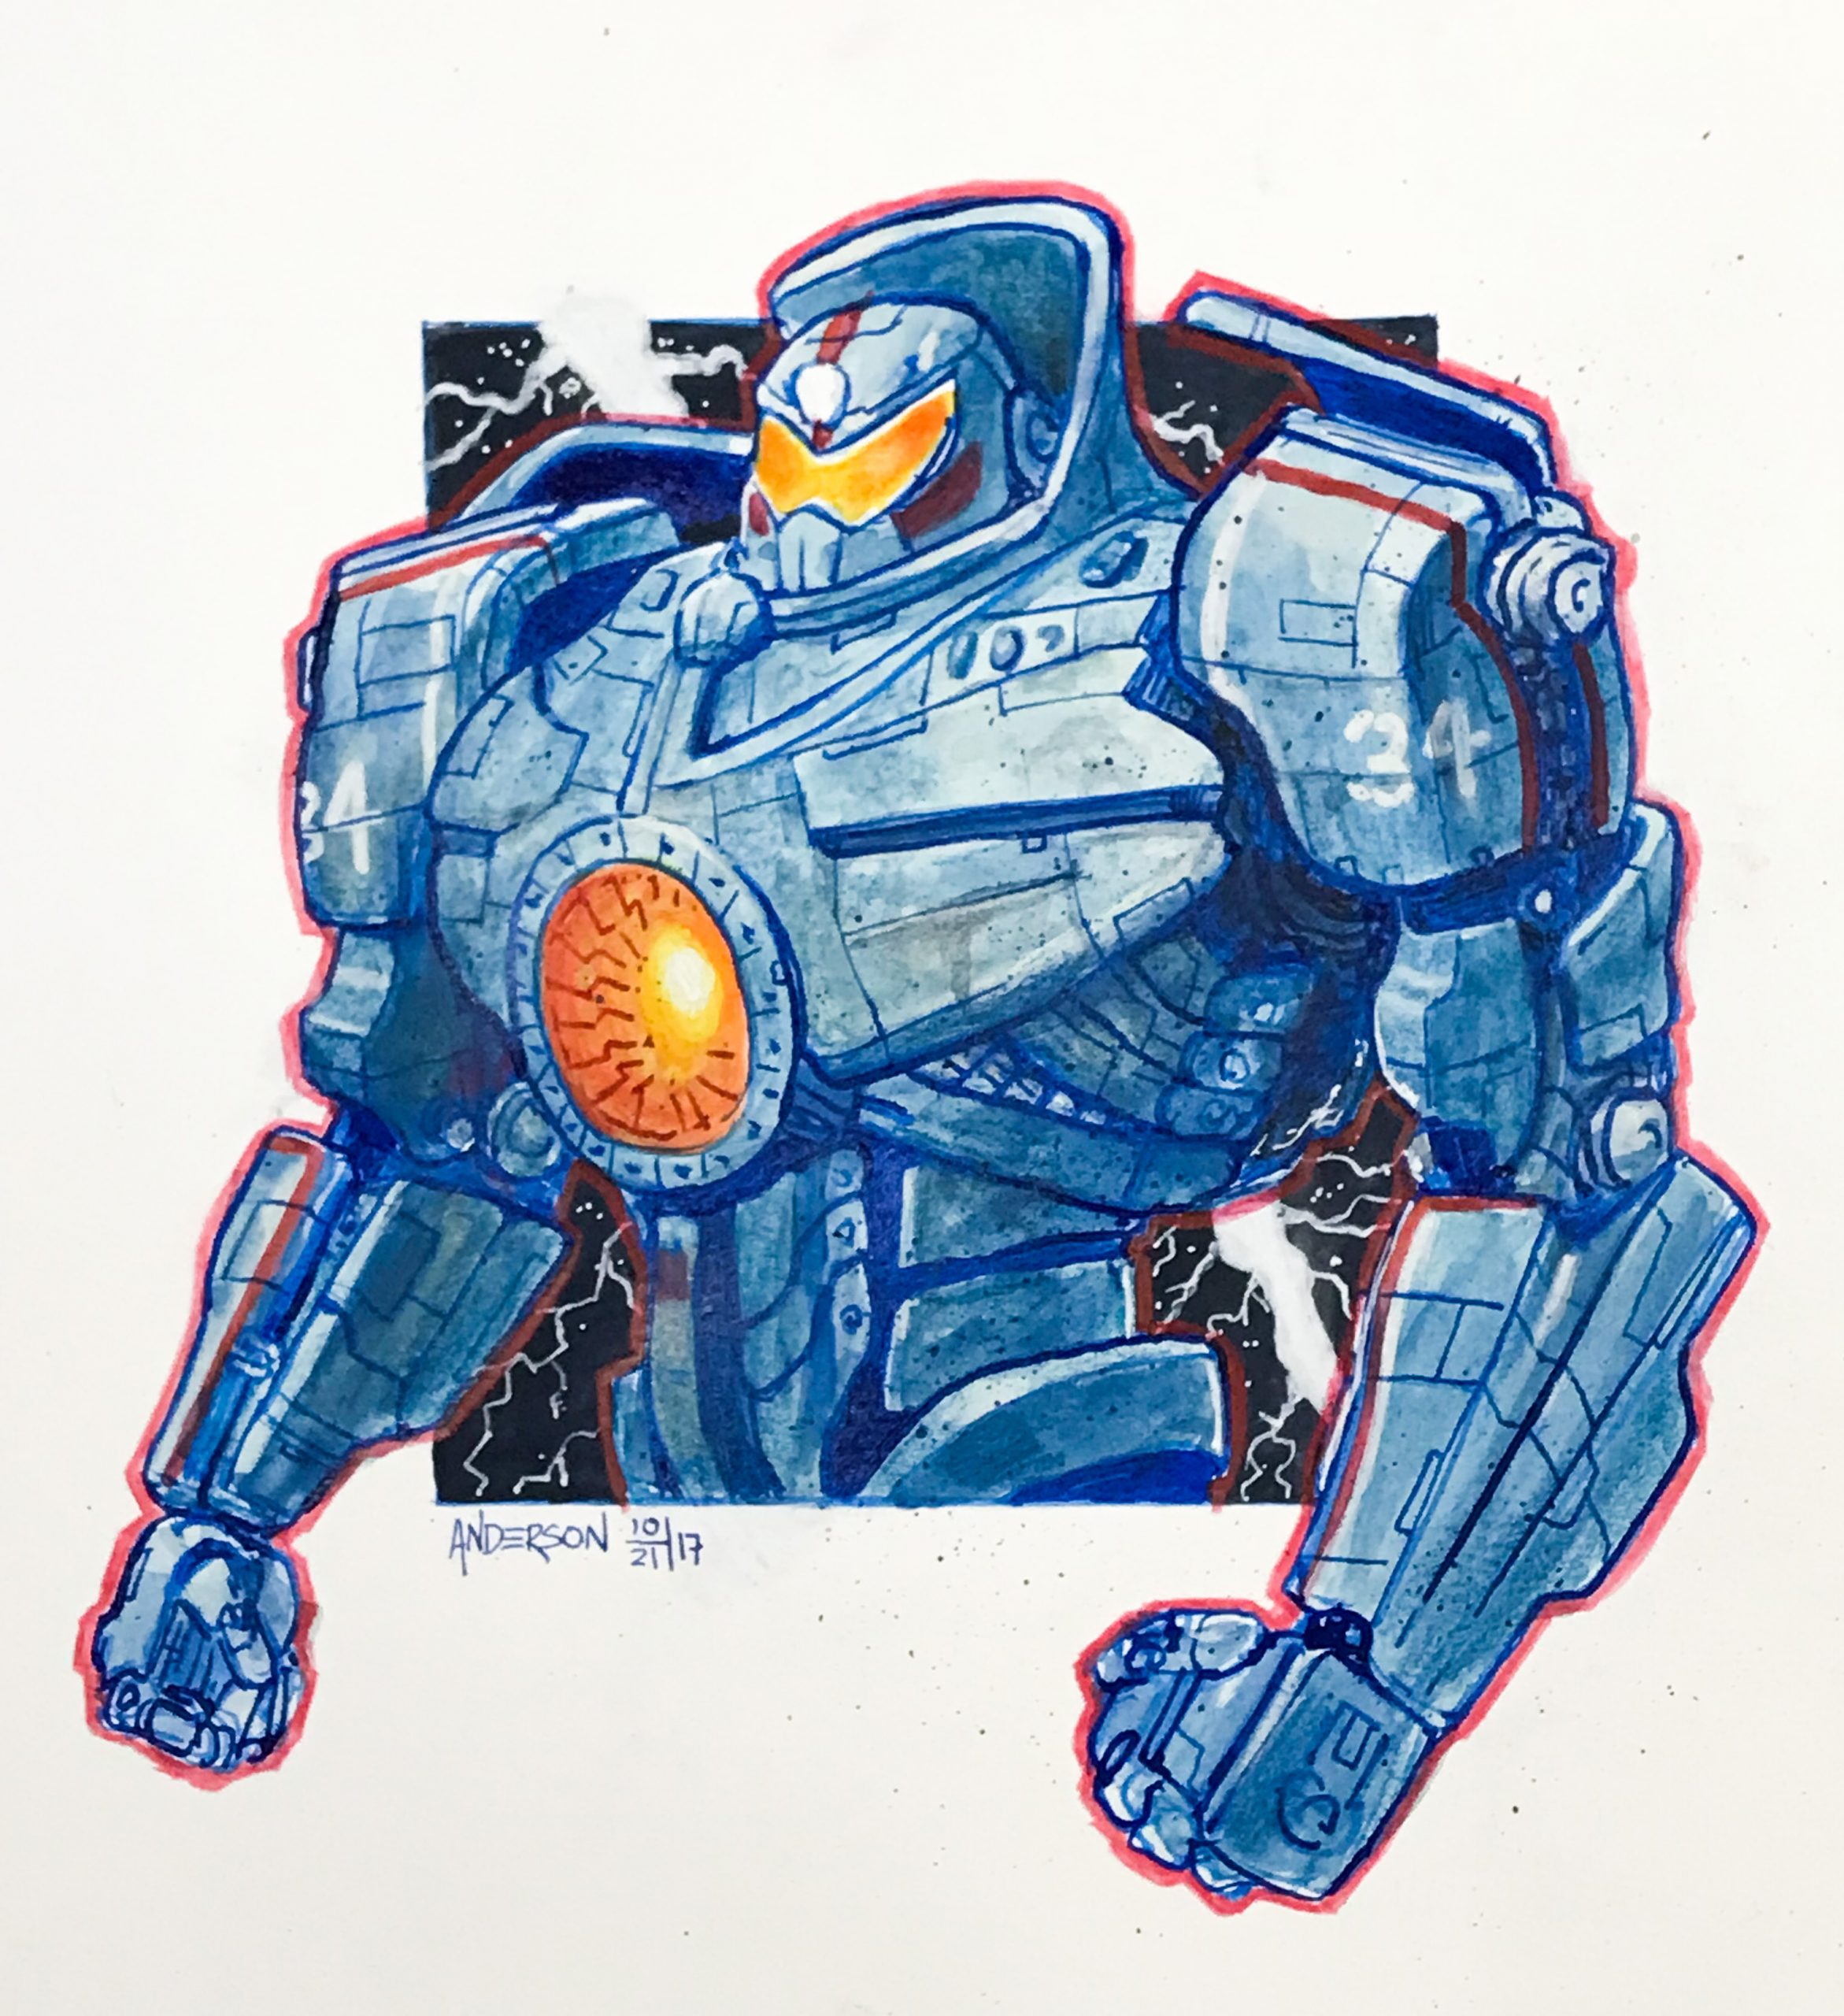 Gypsy Danger Gouache Painting Timothy Anderson Design Find high quality gip...